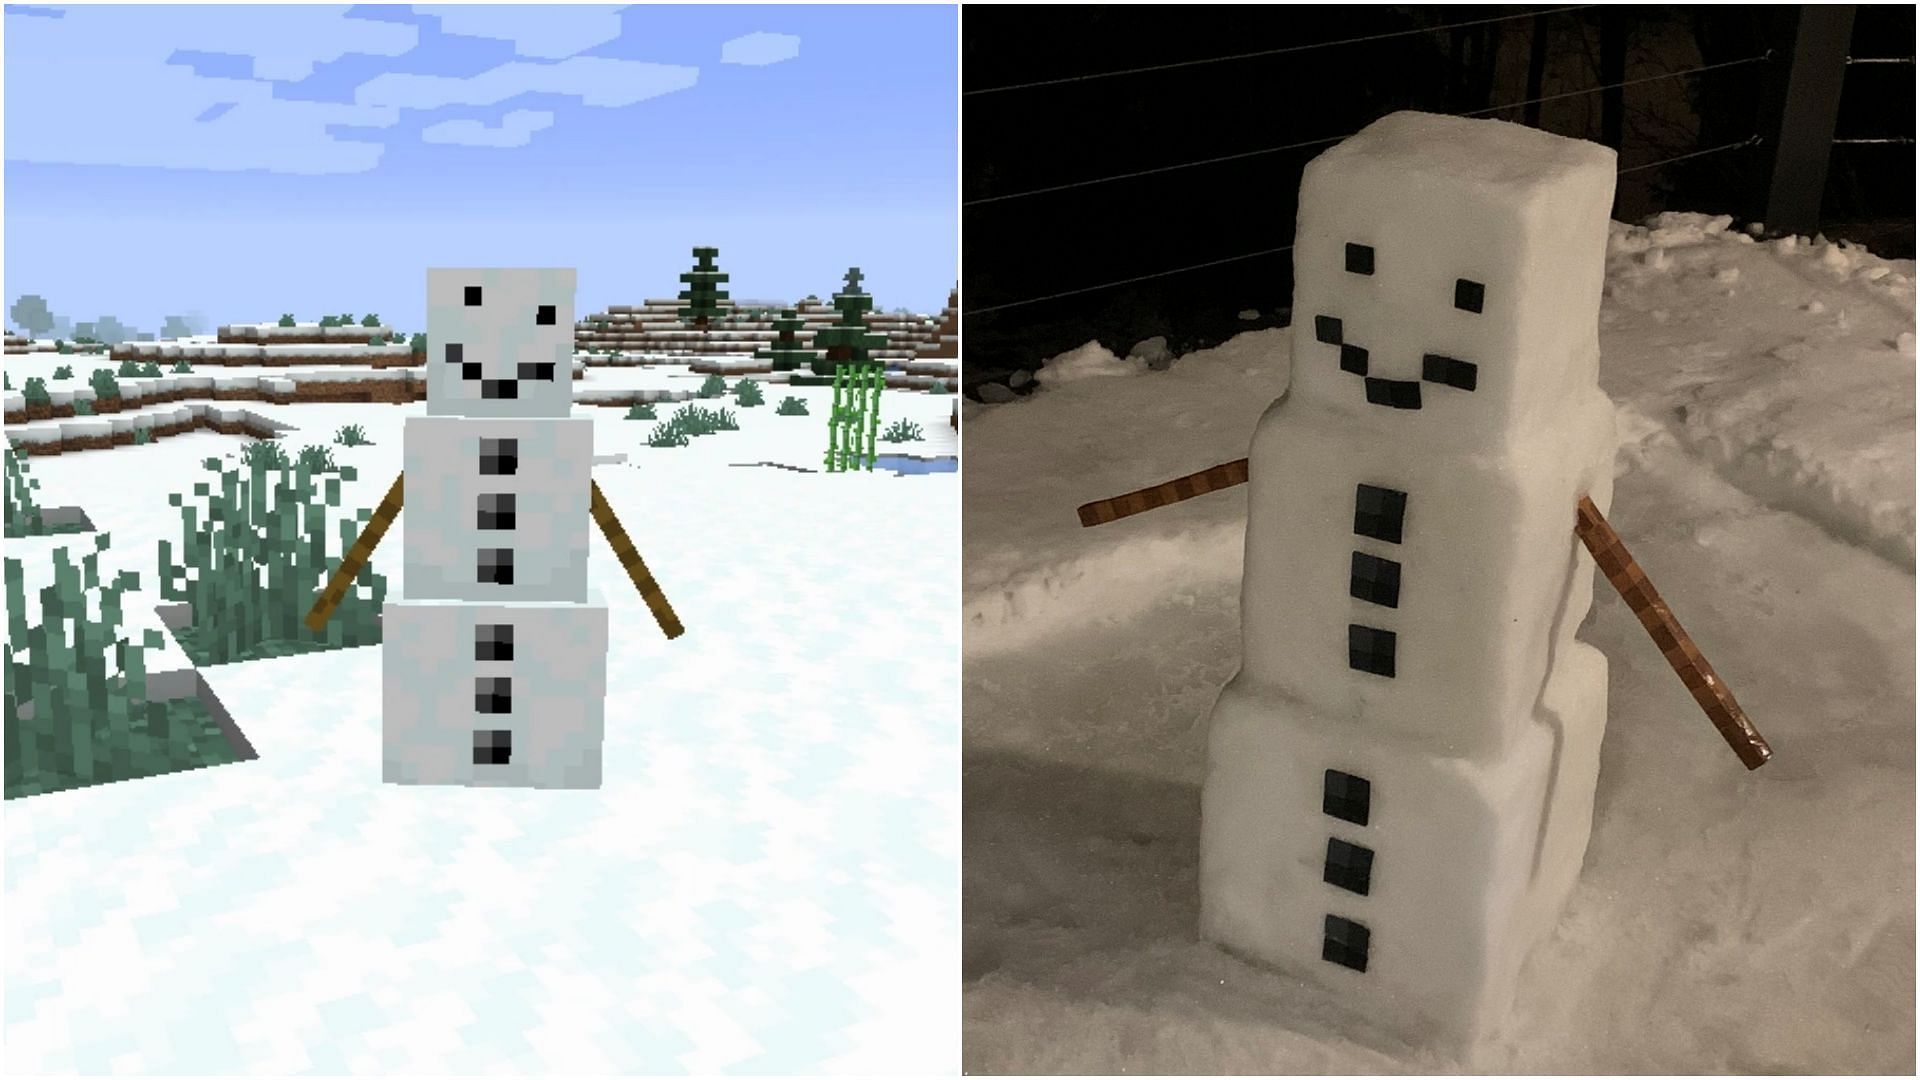 A Minecraft player created an accurate replica of a snow golem in real life (Image via Sportskeeda)